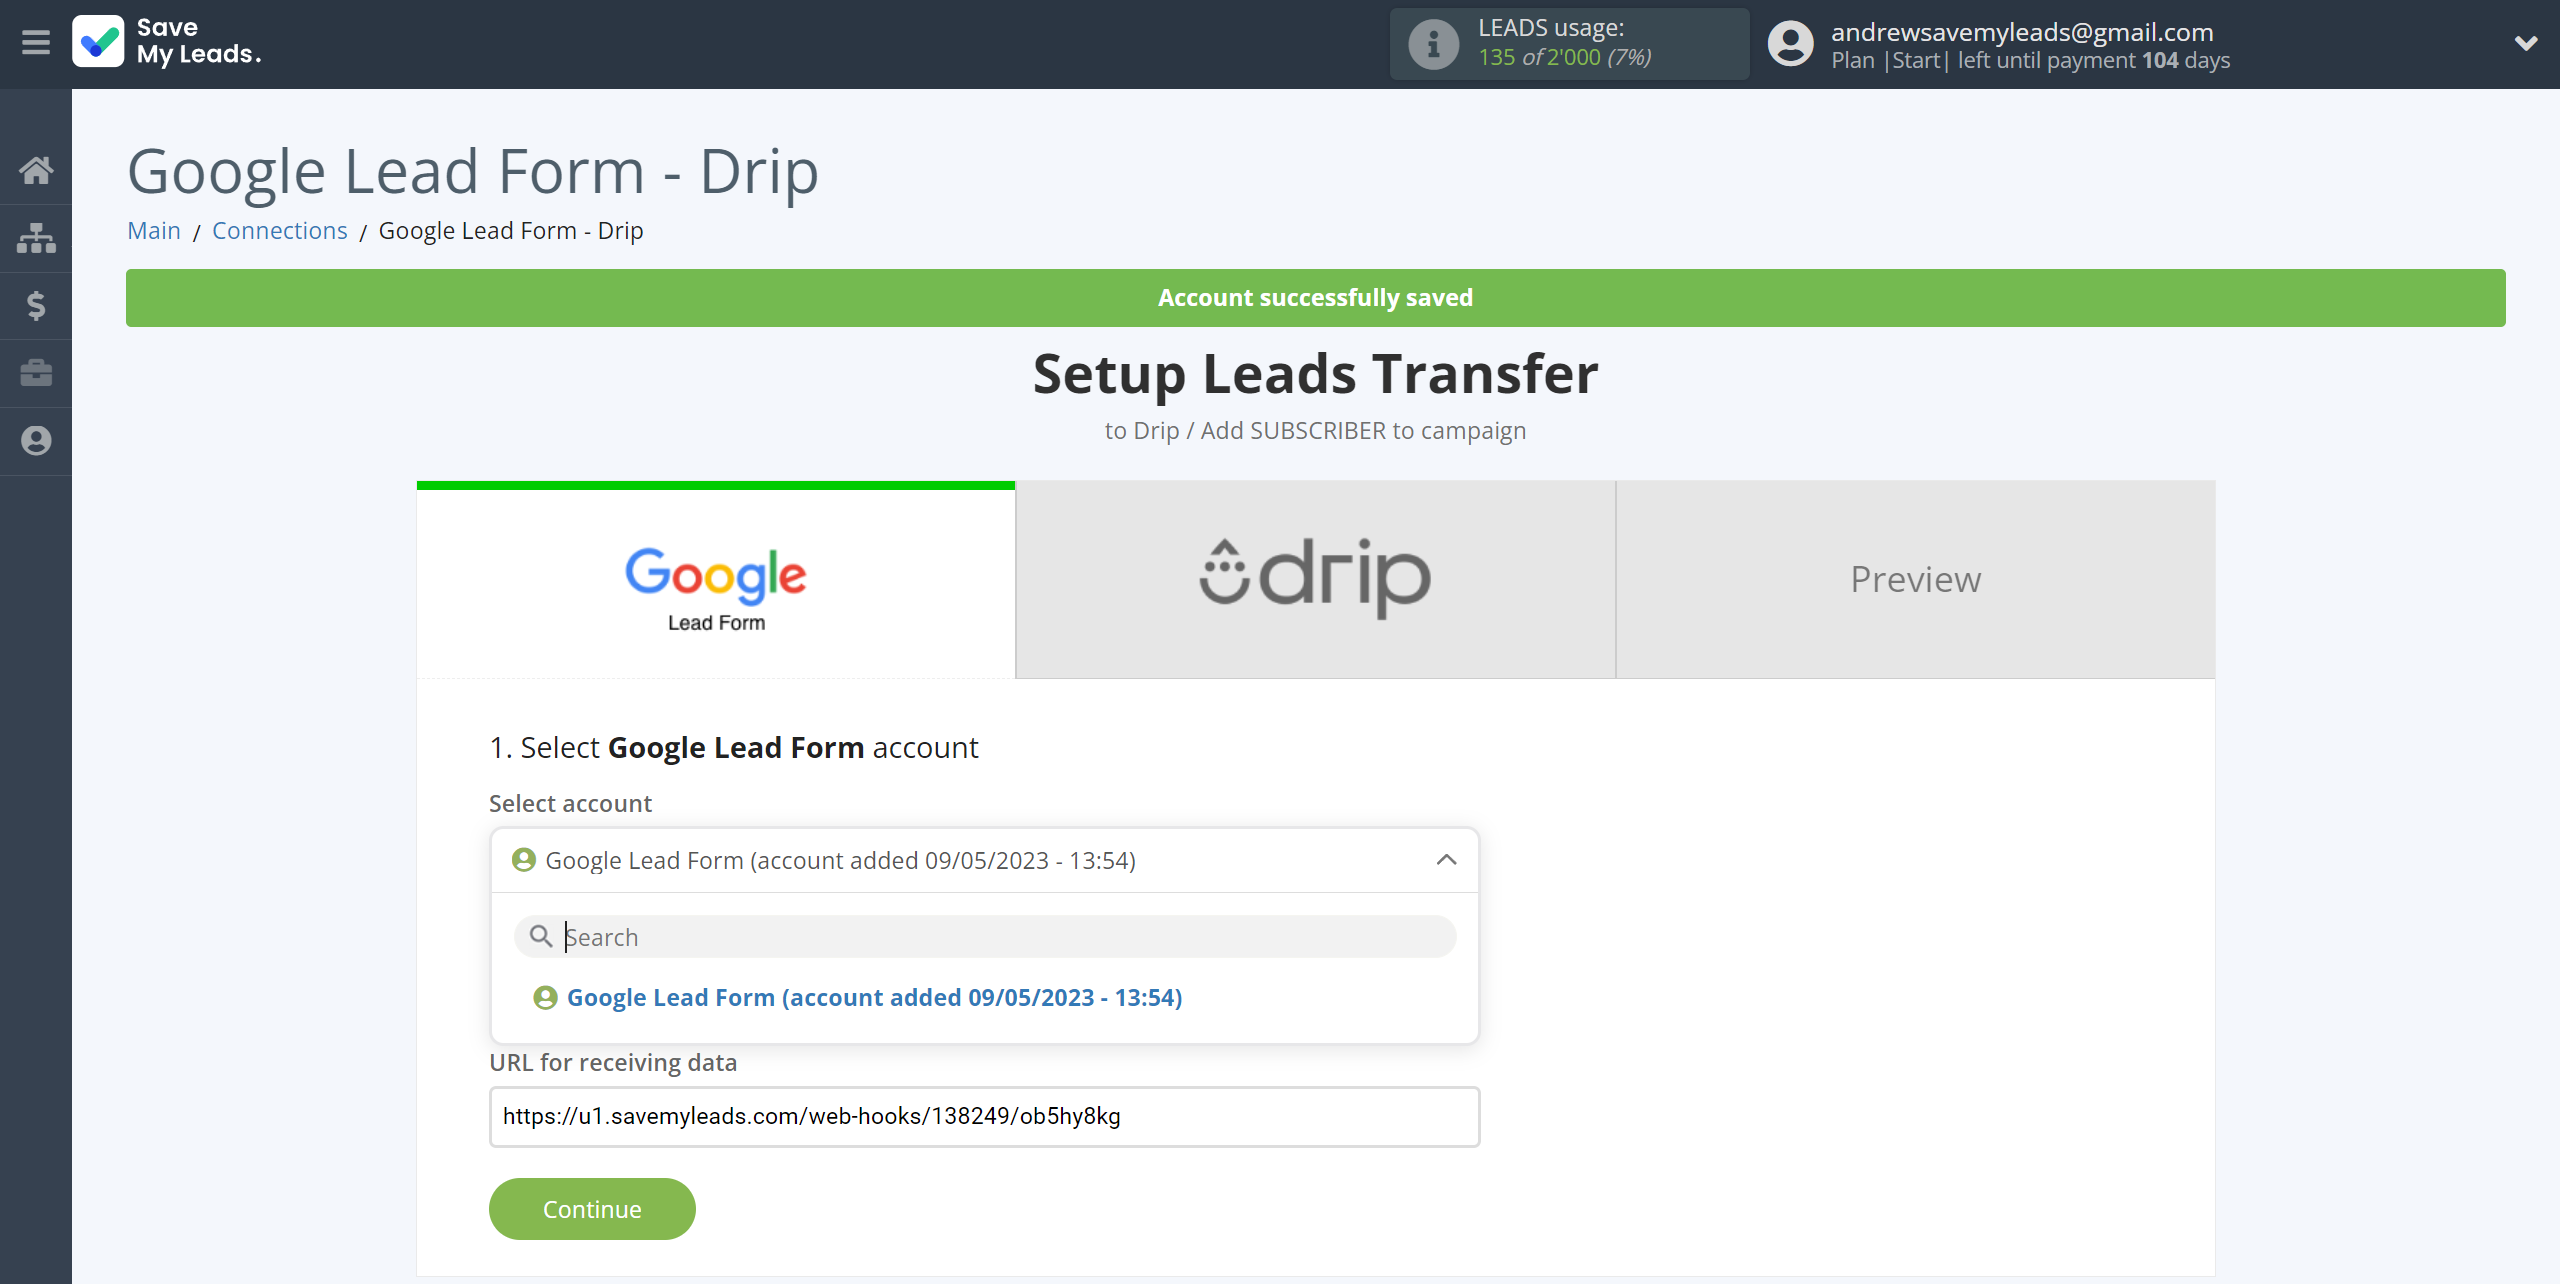 How to Connect Google Lead Form with Drip Add Subscribers to campaign | Data Source account selection